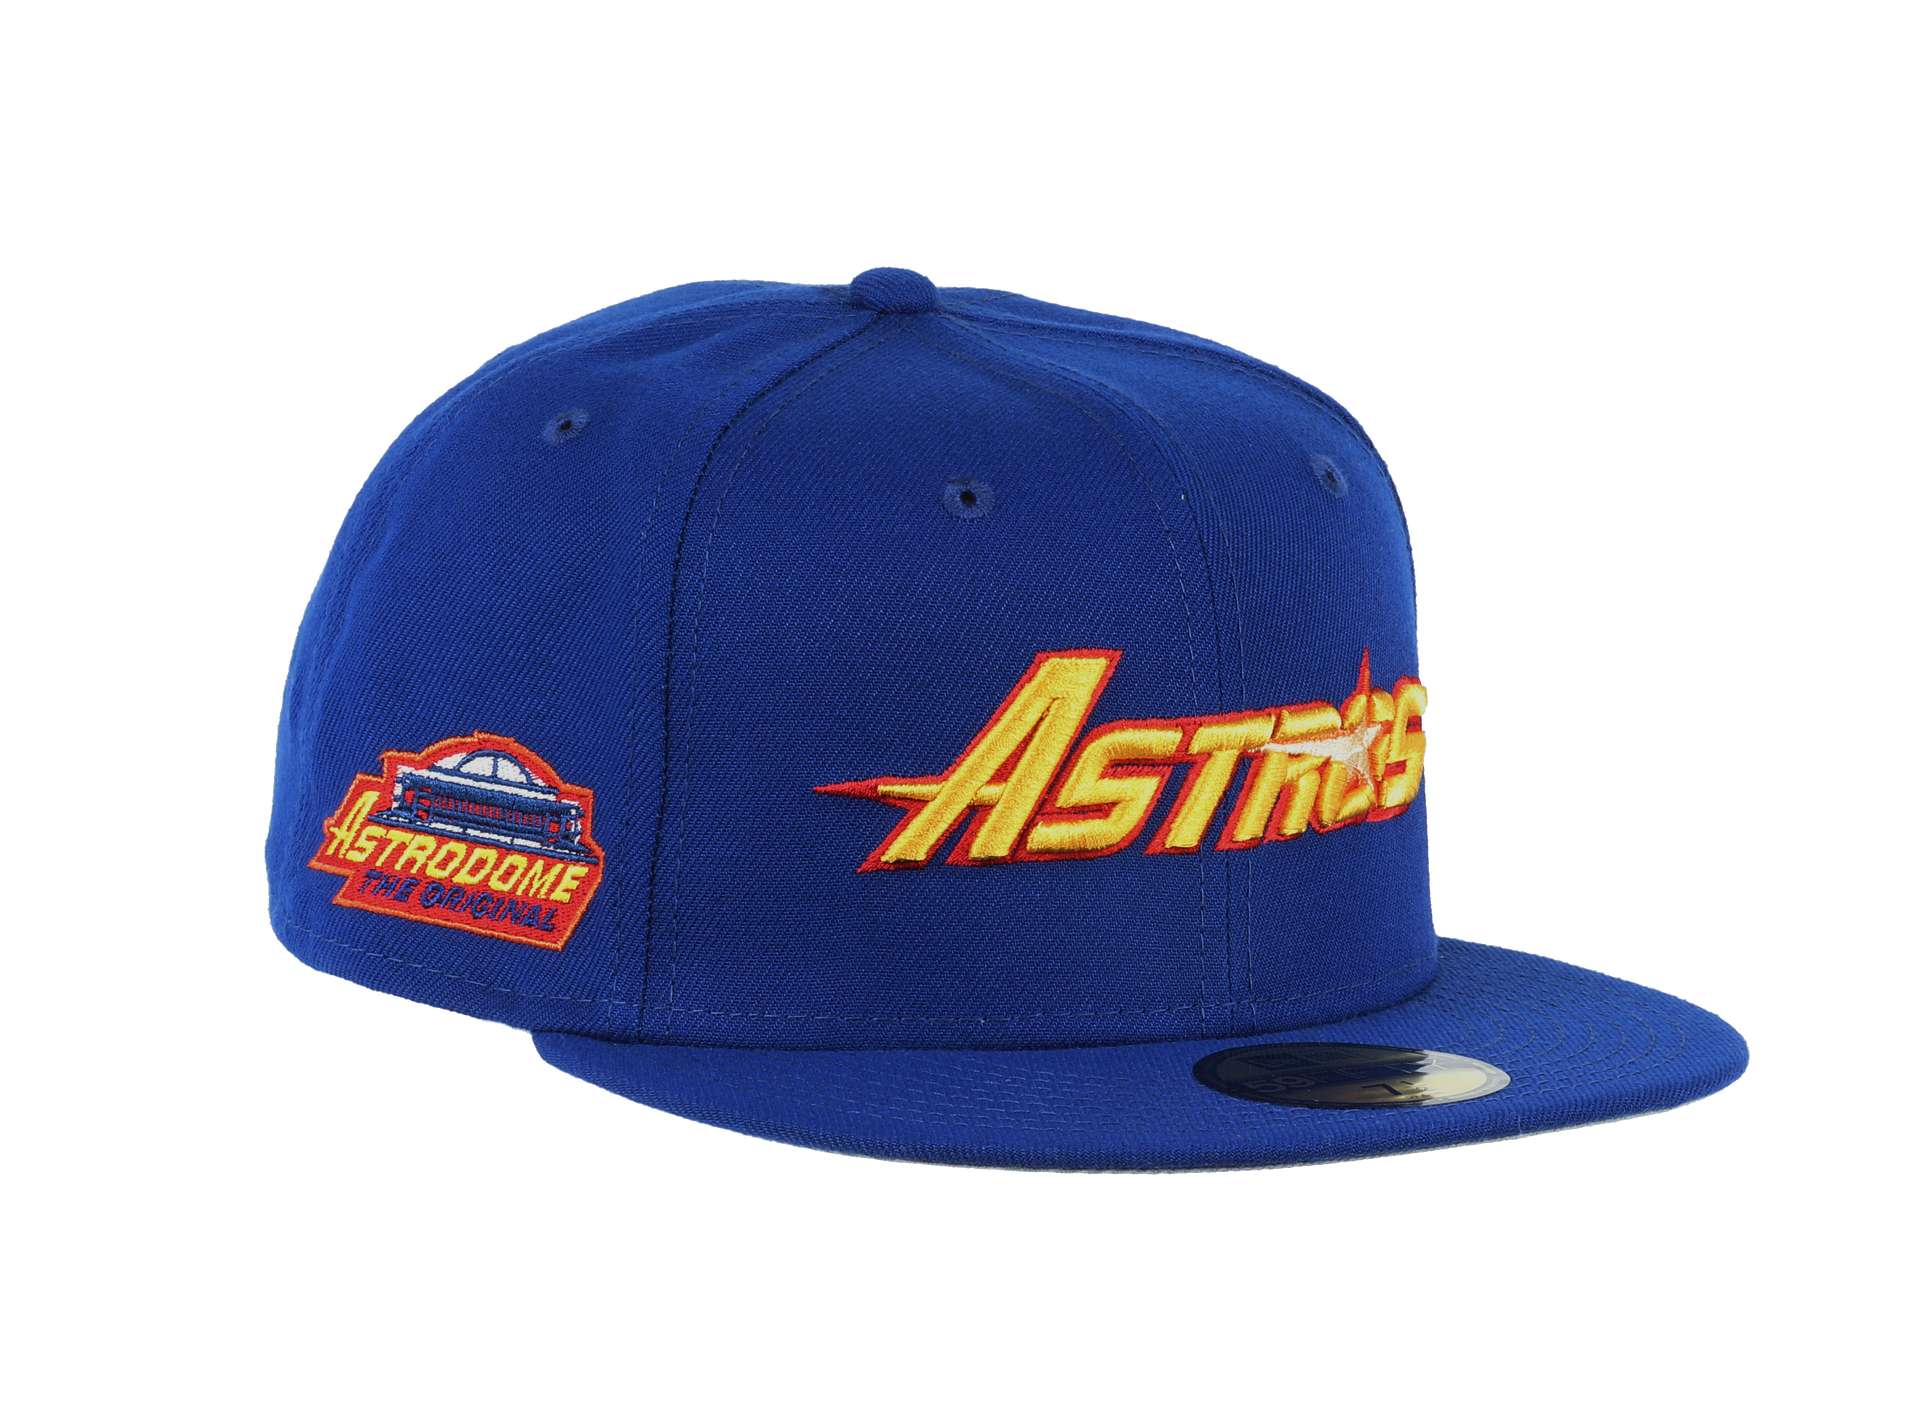 Houston Astros MLB Cooperstown 8th Wonder Astrodome Sidepatch Royal 59Fifty Basecap New Era